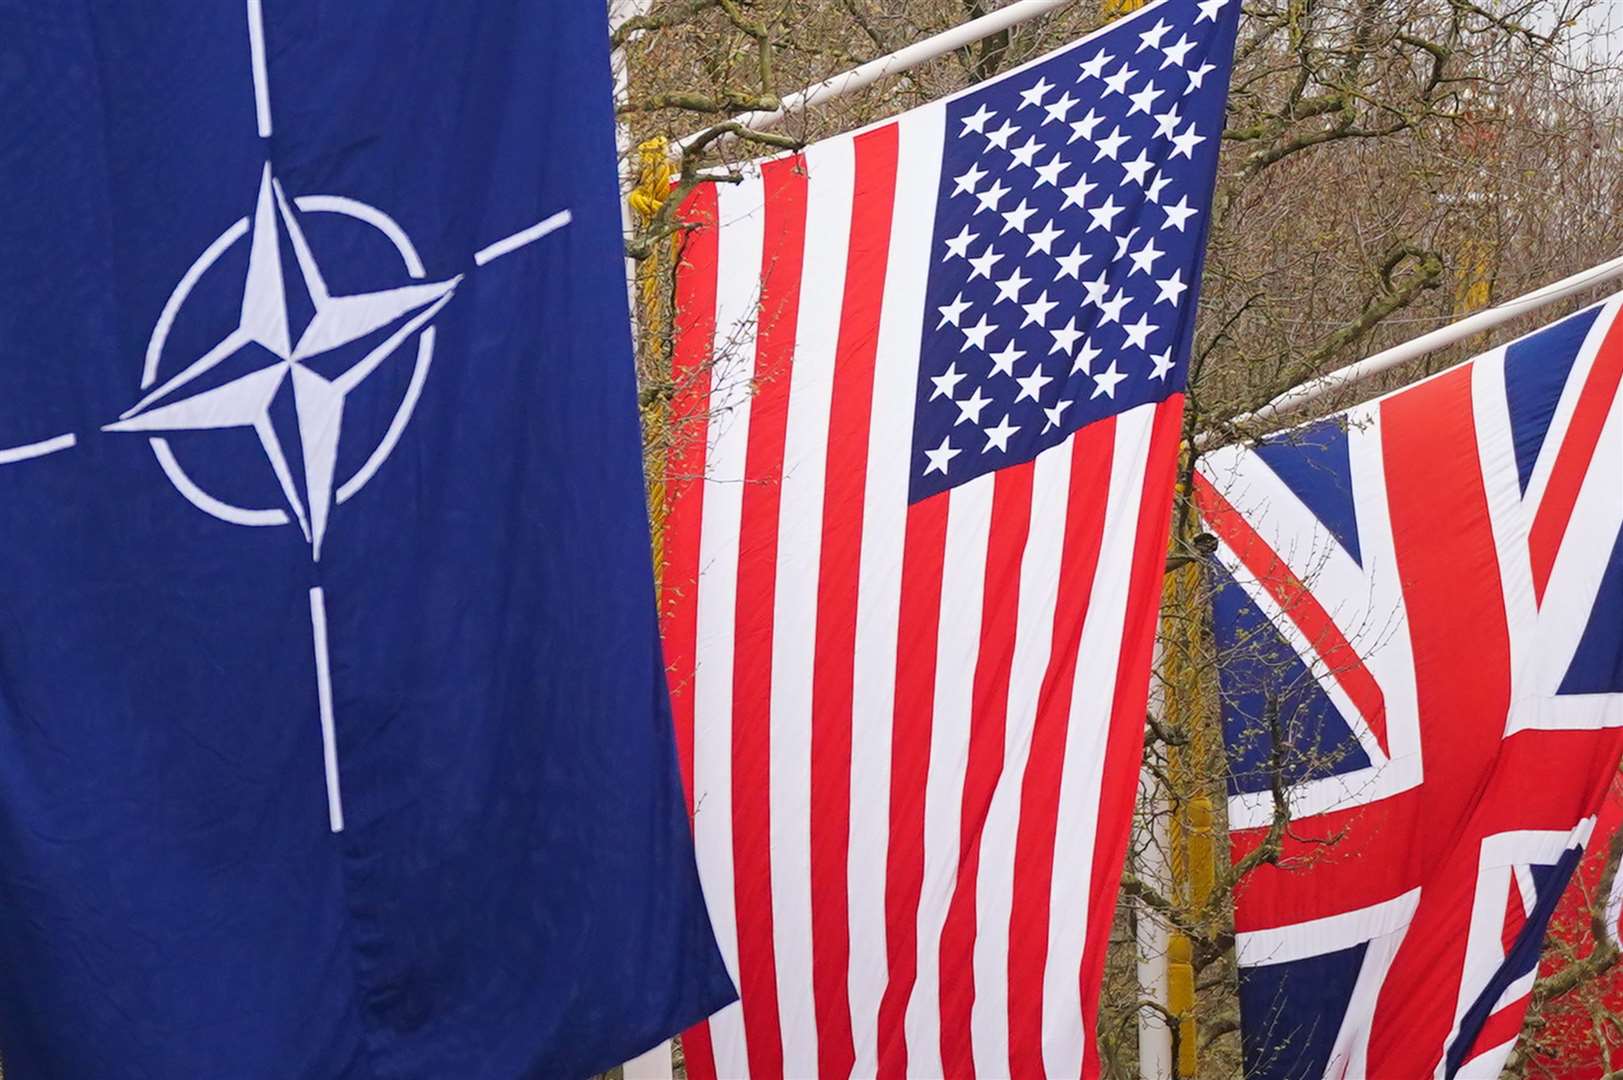 Finland, which has an 830-mile border with Russia, became a member of Nato in April last year (Victoria Jones/PA)